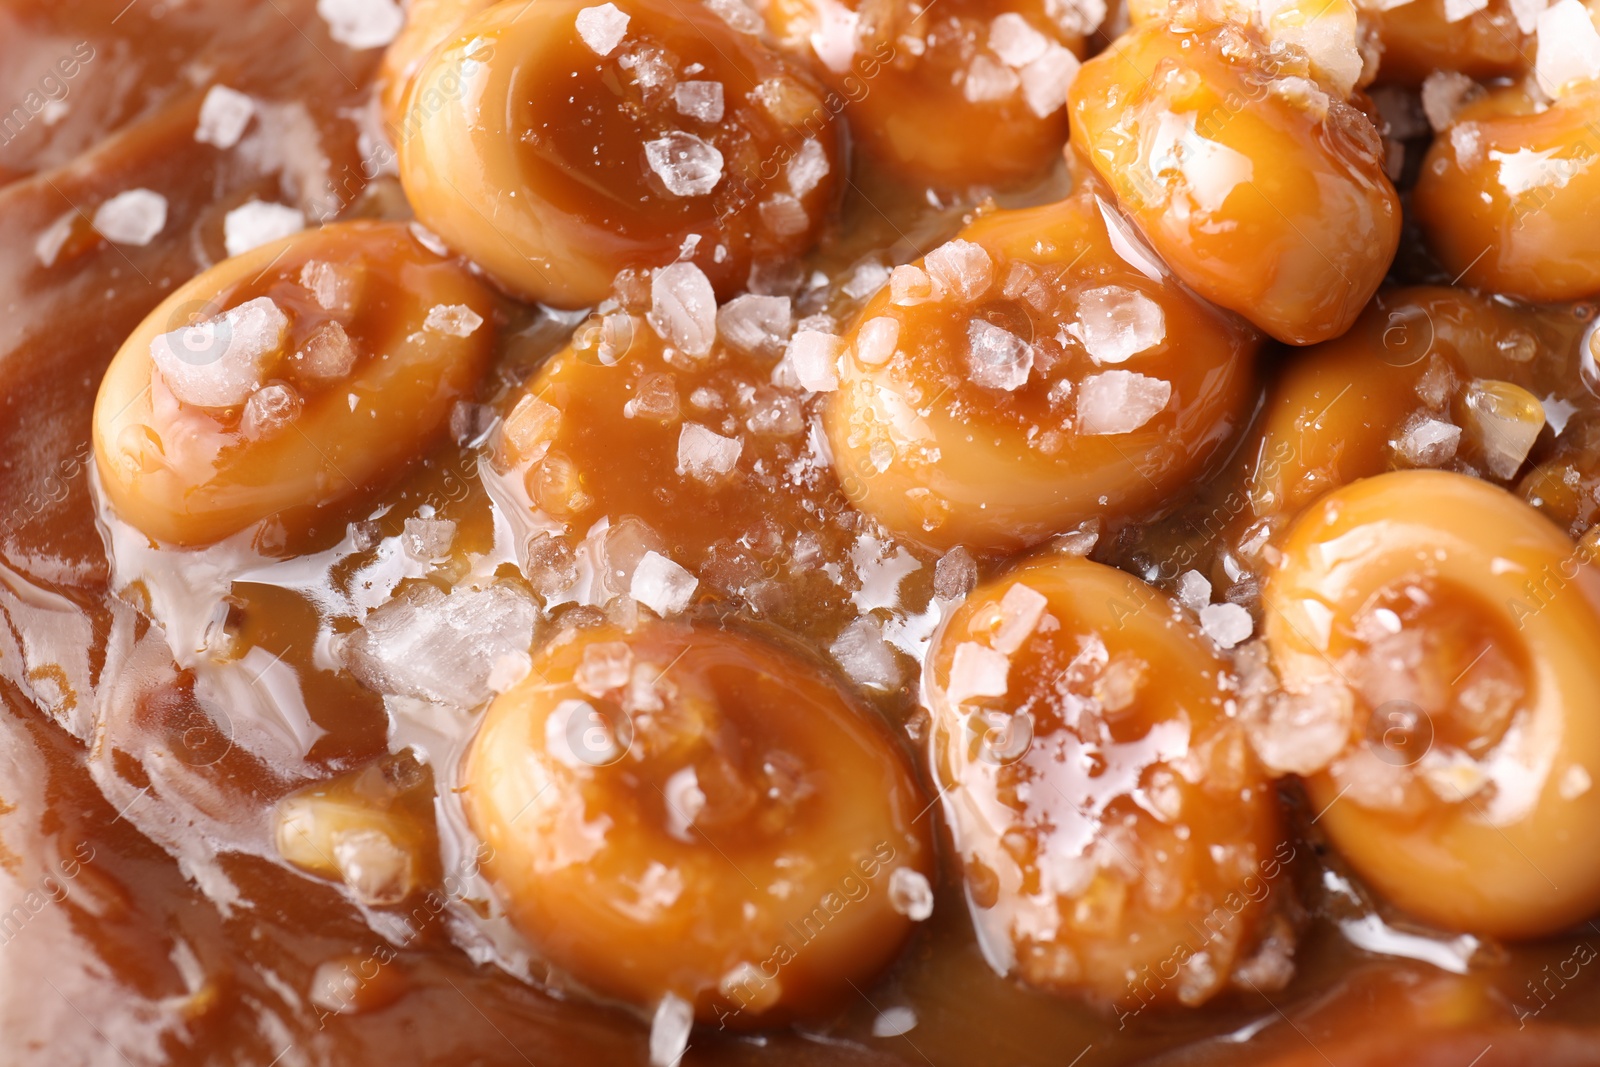 Photo of Tasty candies, caramel sauce and salt as background, top view